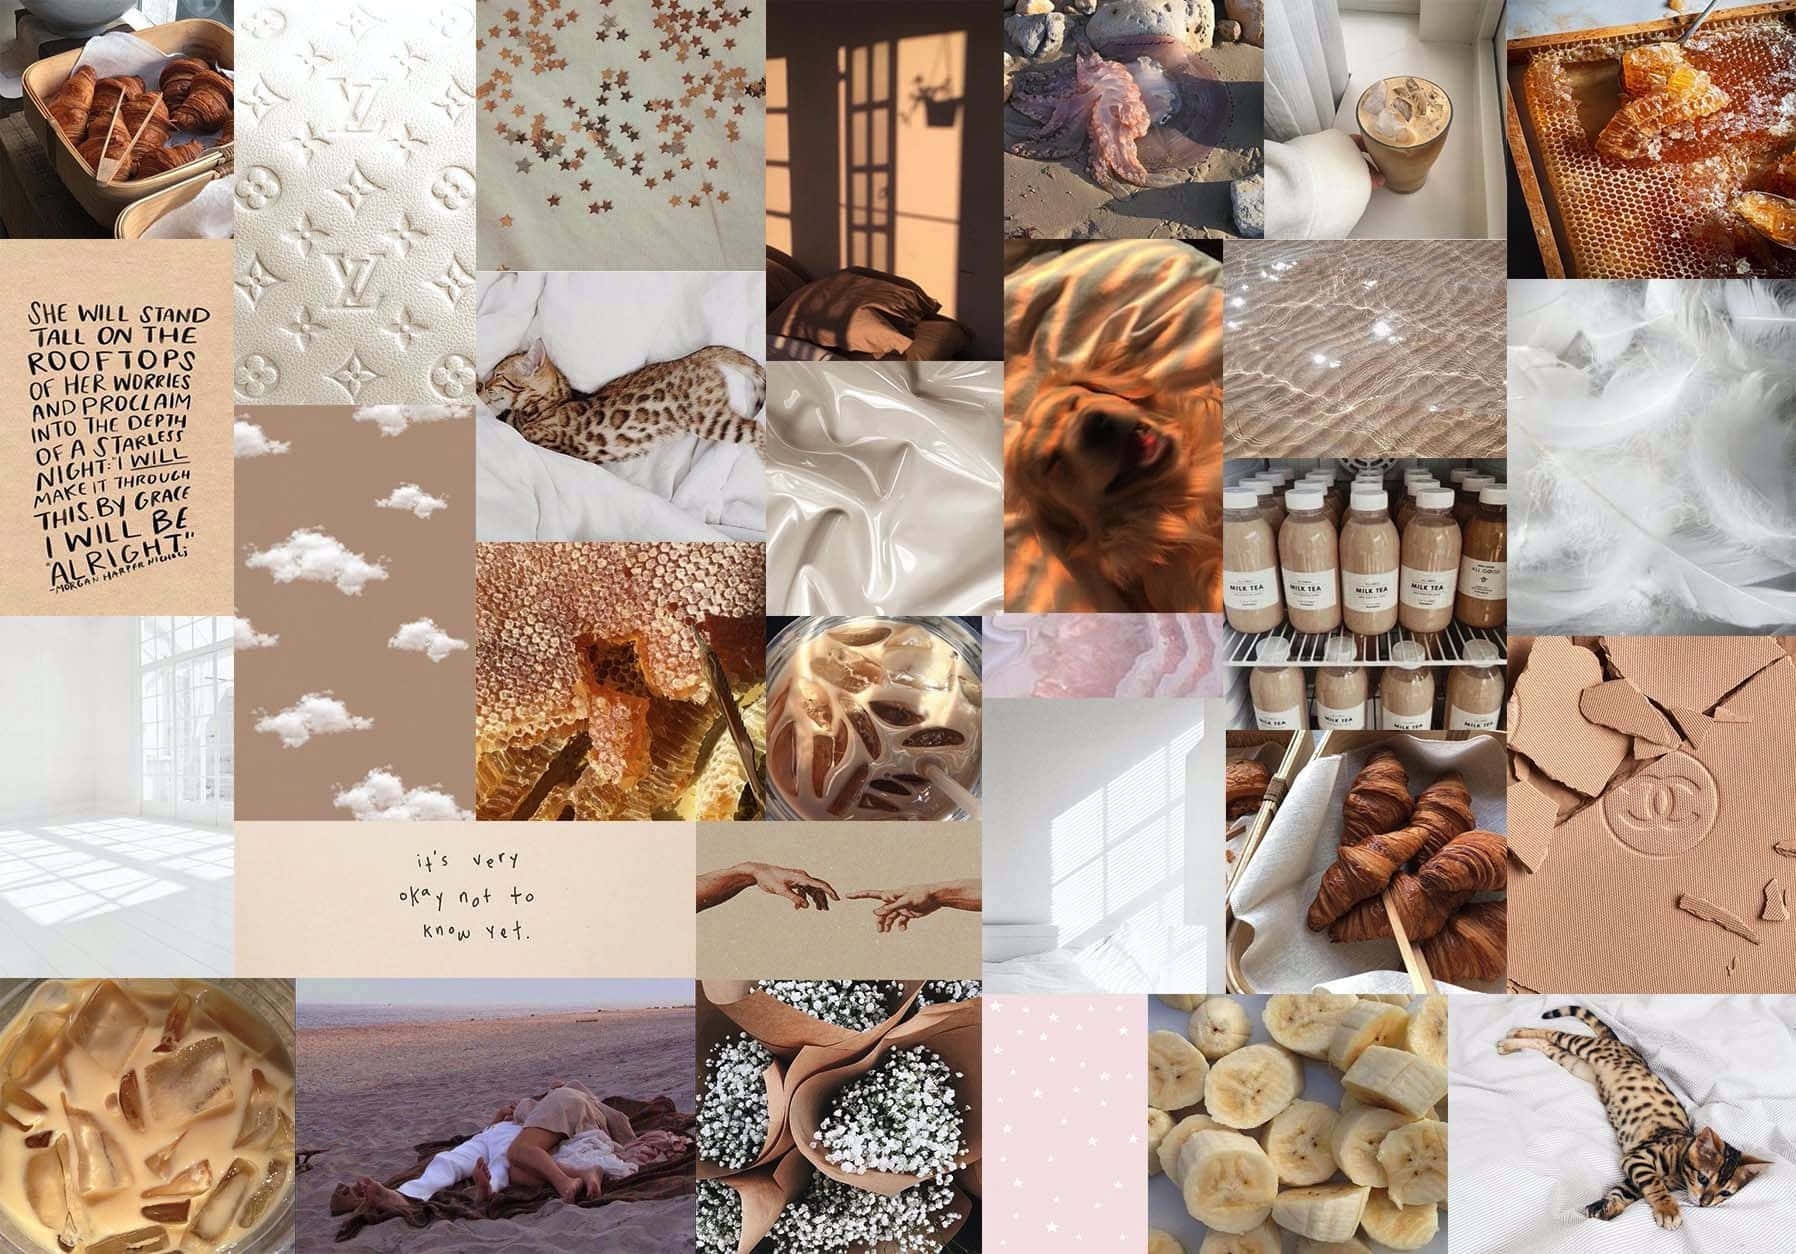 A Collage Of Photos Of Food And Other Items